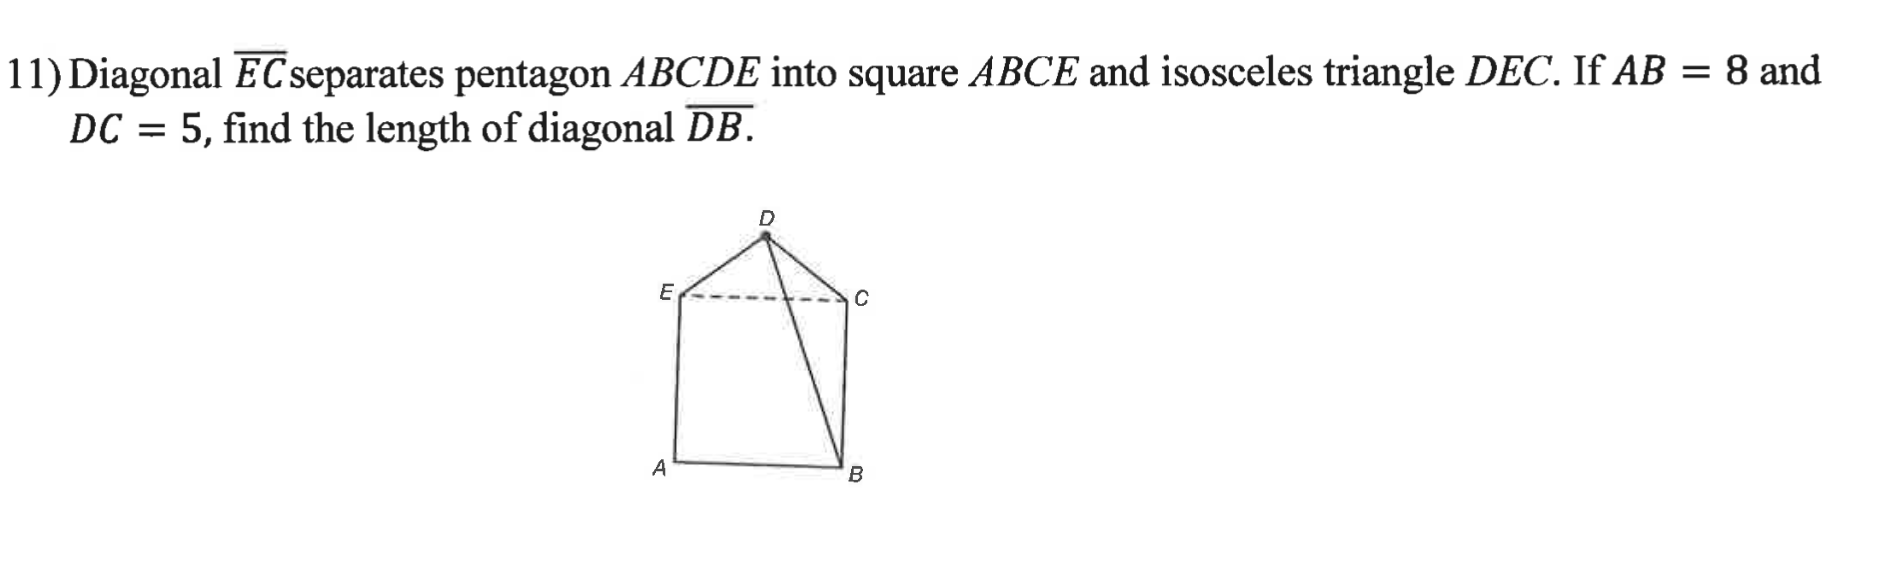 11) Diagonal EC separates pentagon ABCDE into square ABCE and isosceles triangle DEC. If AB = 8 and
DC = 5, find the length of diagonal DB.
